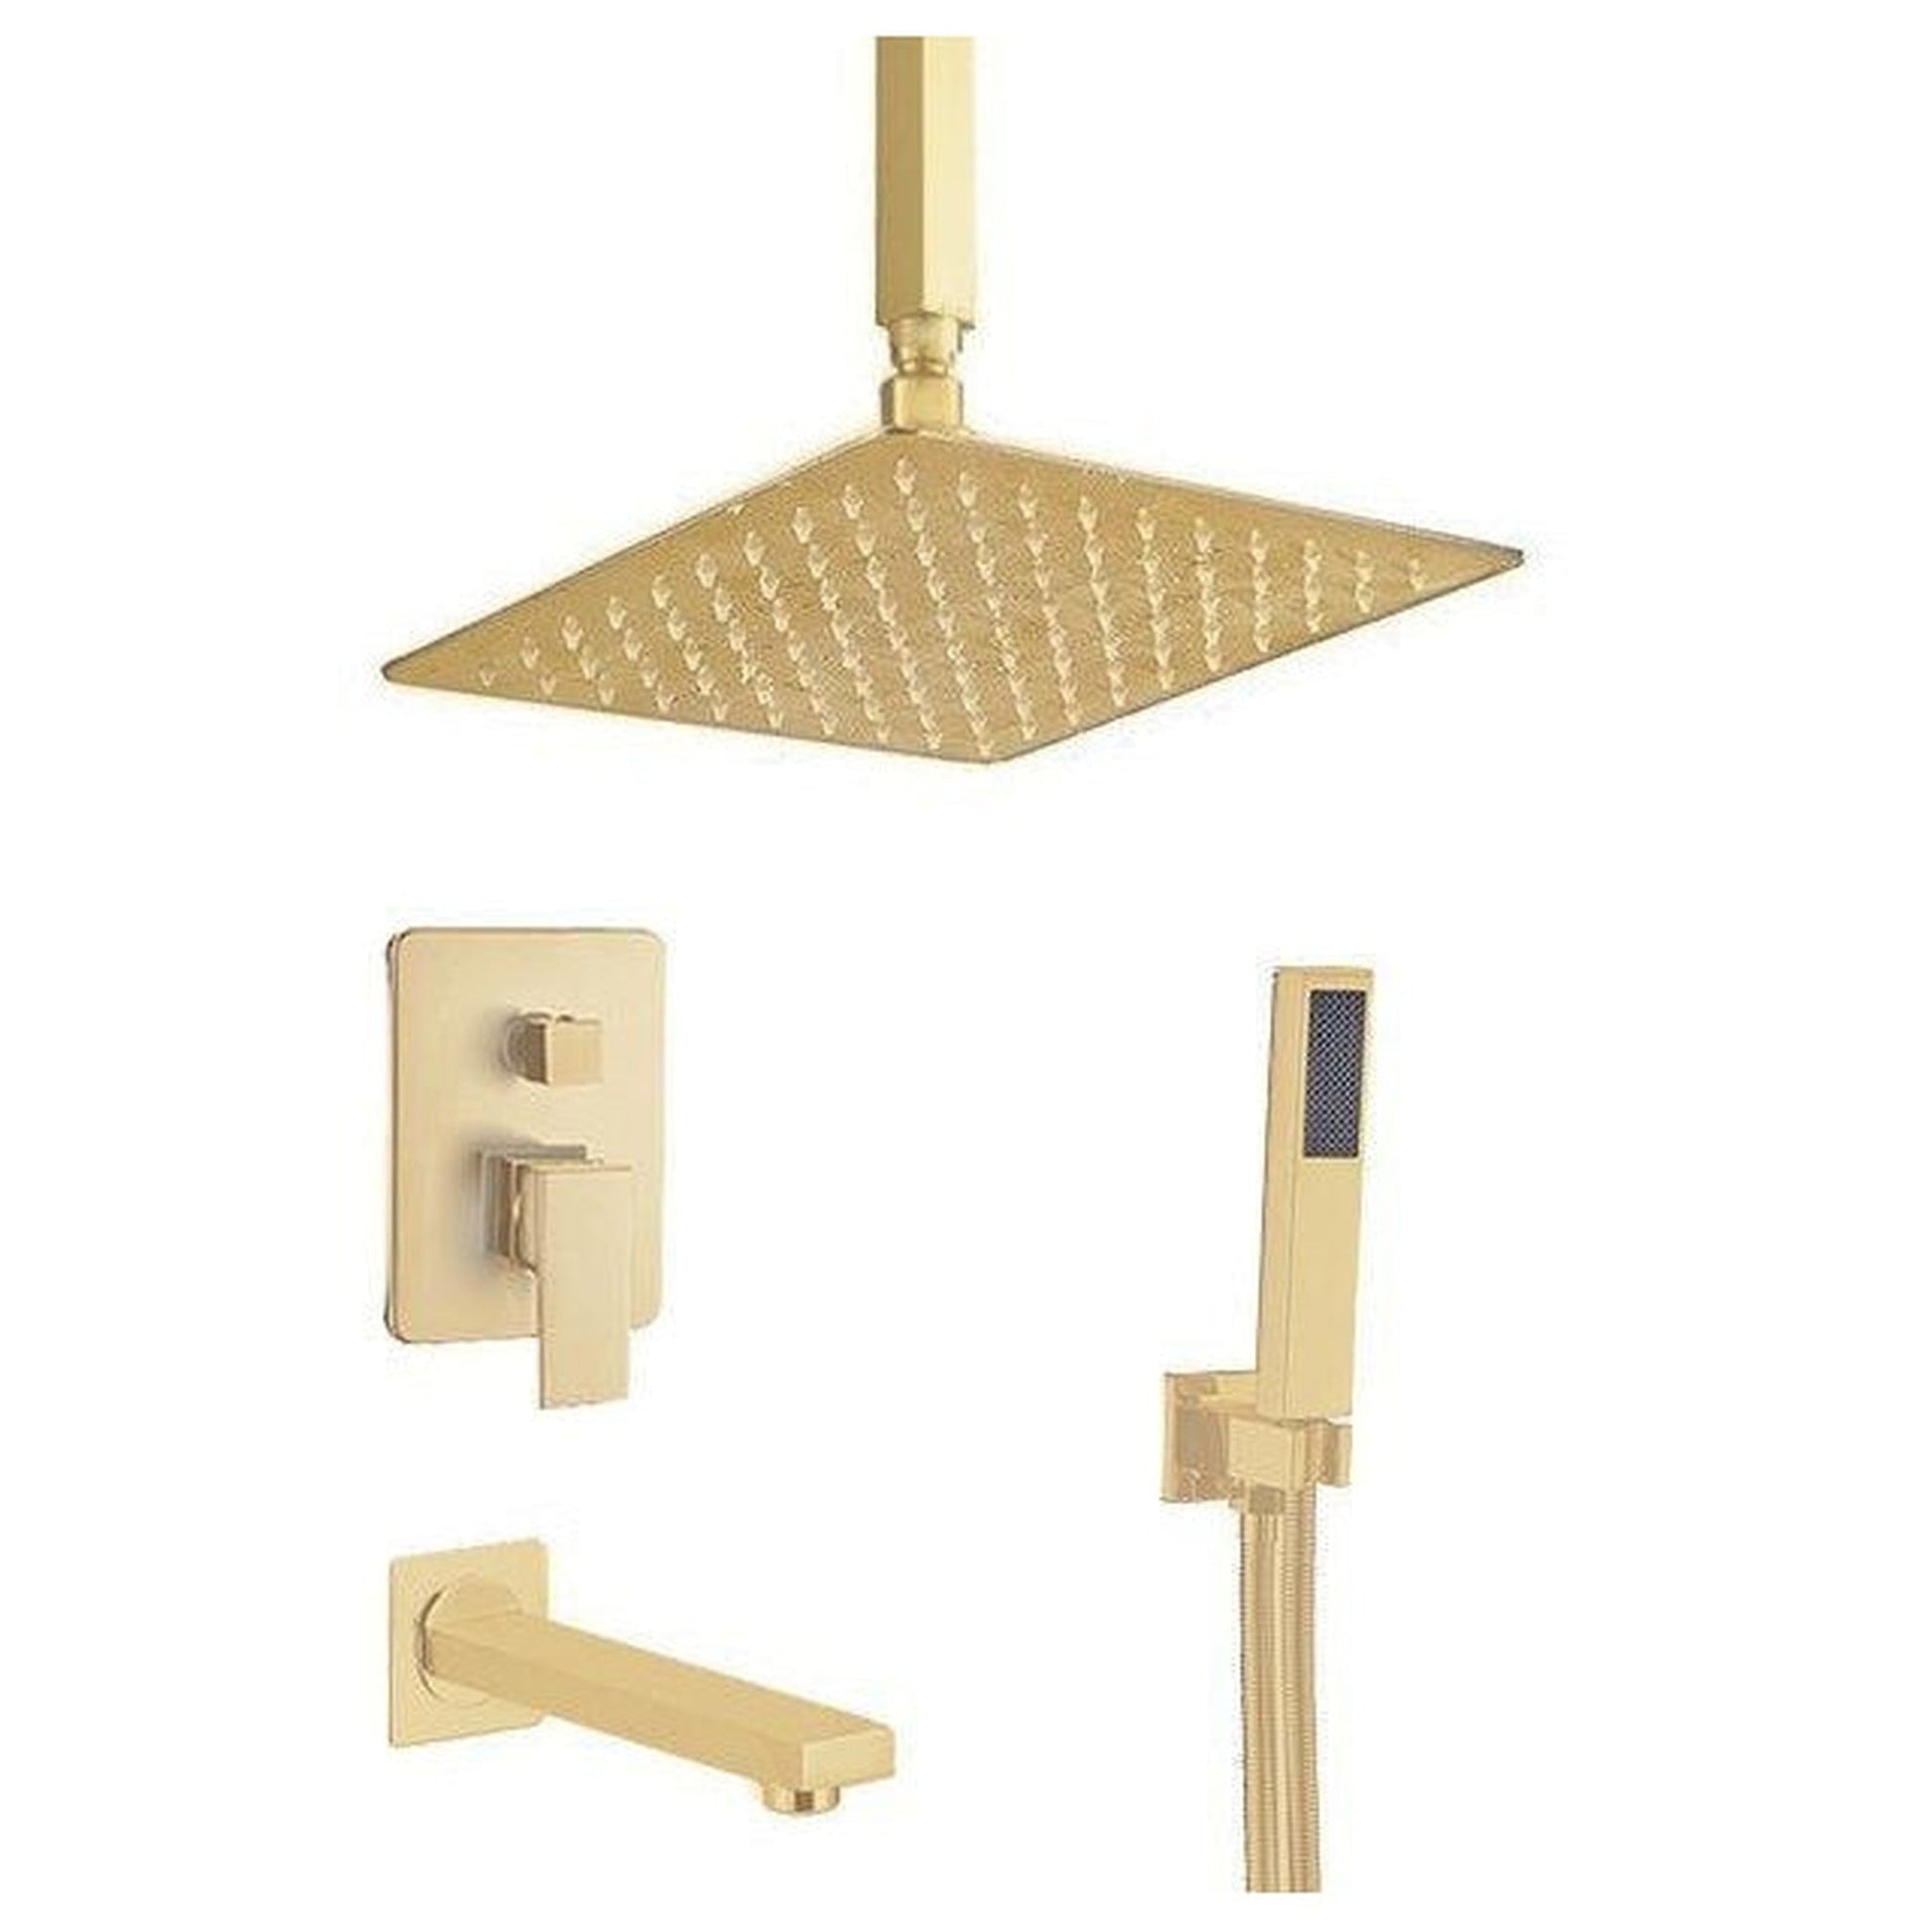 FontanaShowers Verona Creative Luxury 12" Gold Square Ceiling Mounted 3-Way Single Handle Mixer Shower System With Hand Shower and Tub Spout